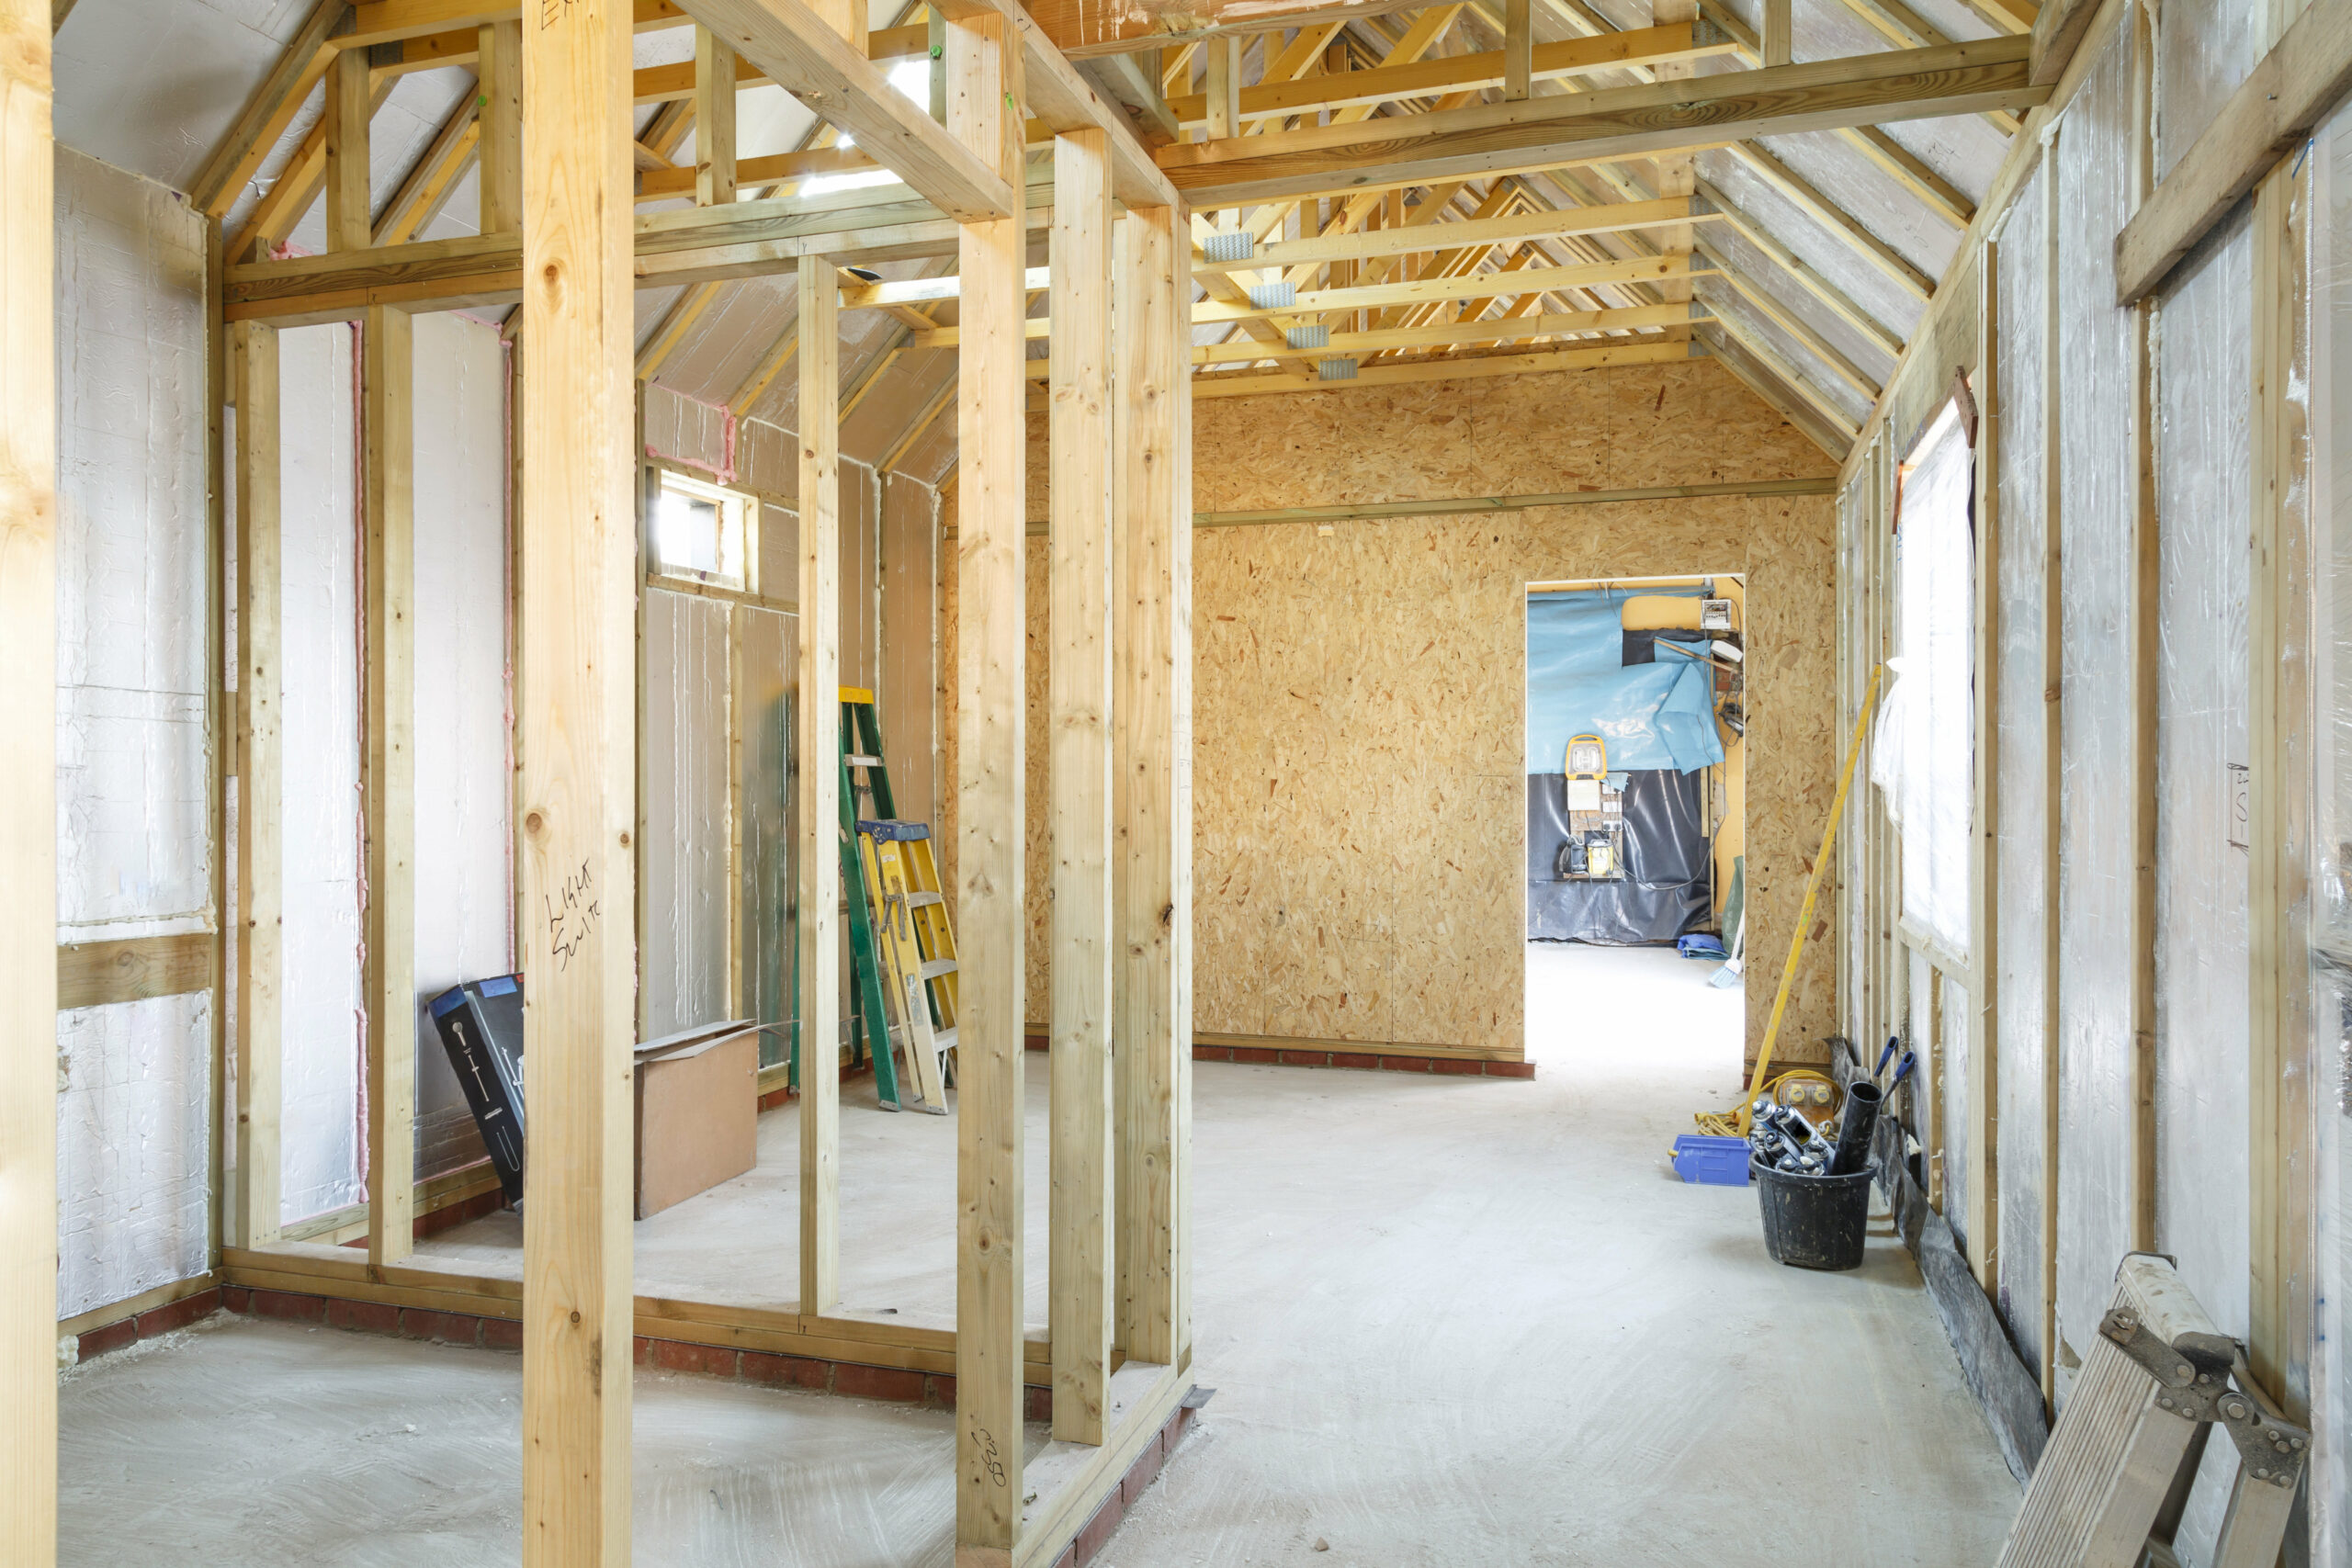 house that is under construction has wooden framing in it, in the style of domestic interiors, dark cyan and light beige, textured surfaces, light beige and yellow, natural lighting, rubens, raw materials